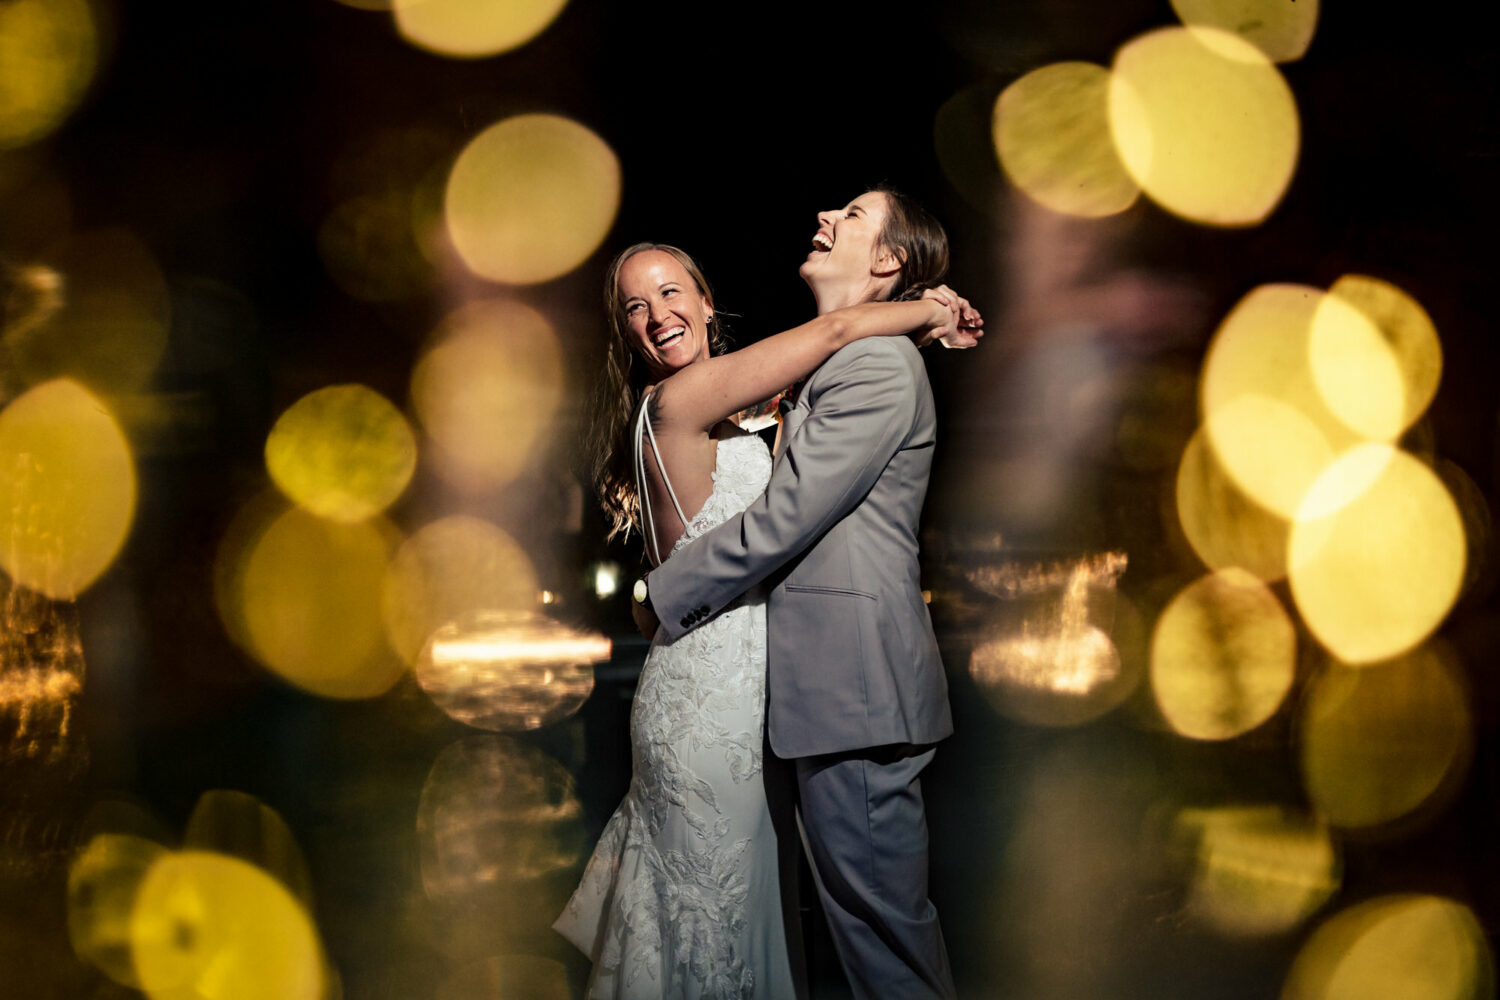 Beautiful lighting at a first dance for two brides.